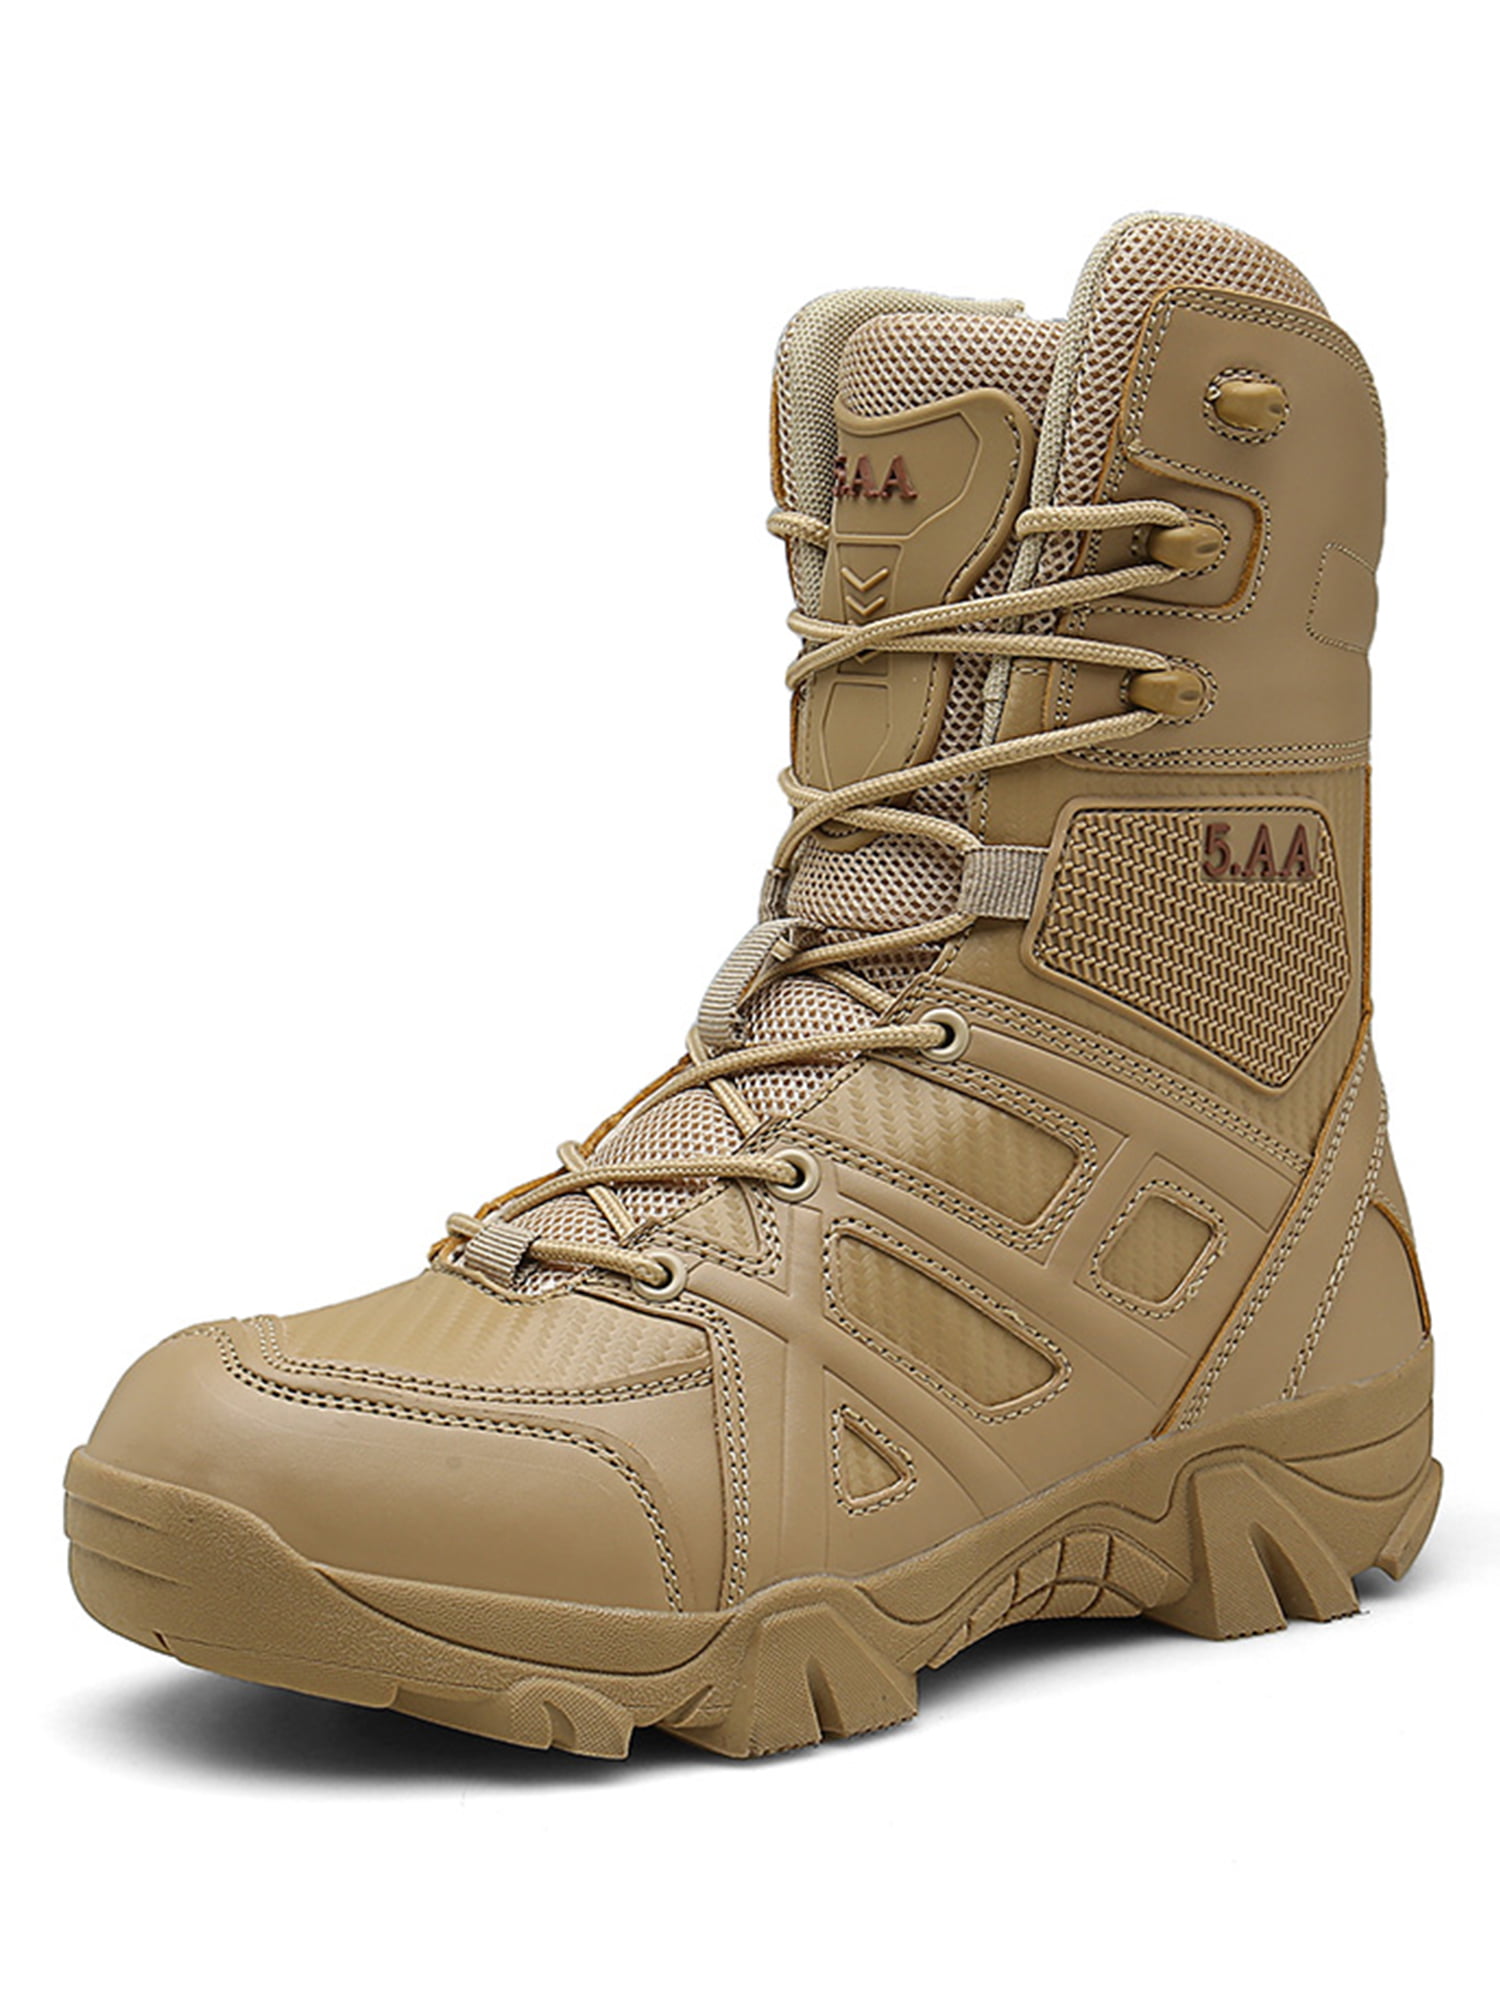 Special Forces Tactical Boots Military Training Tooling Walking Shoes N\C Outdoor Combat Boots 